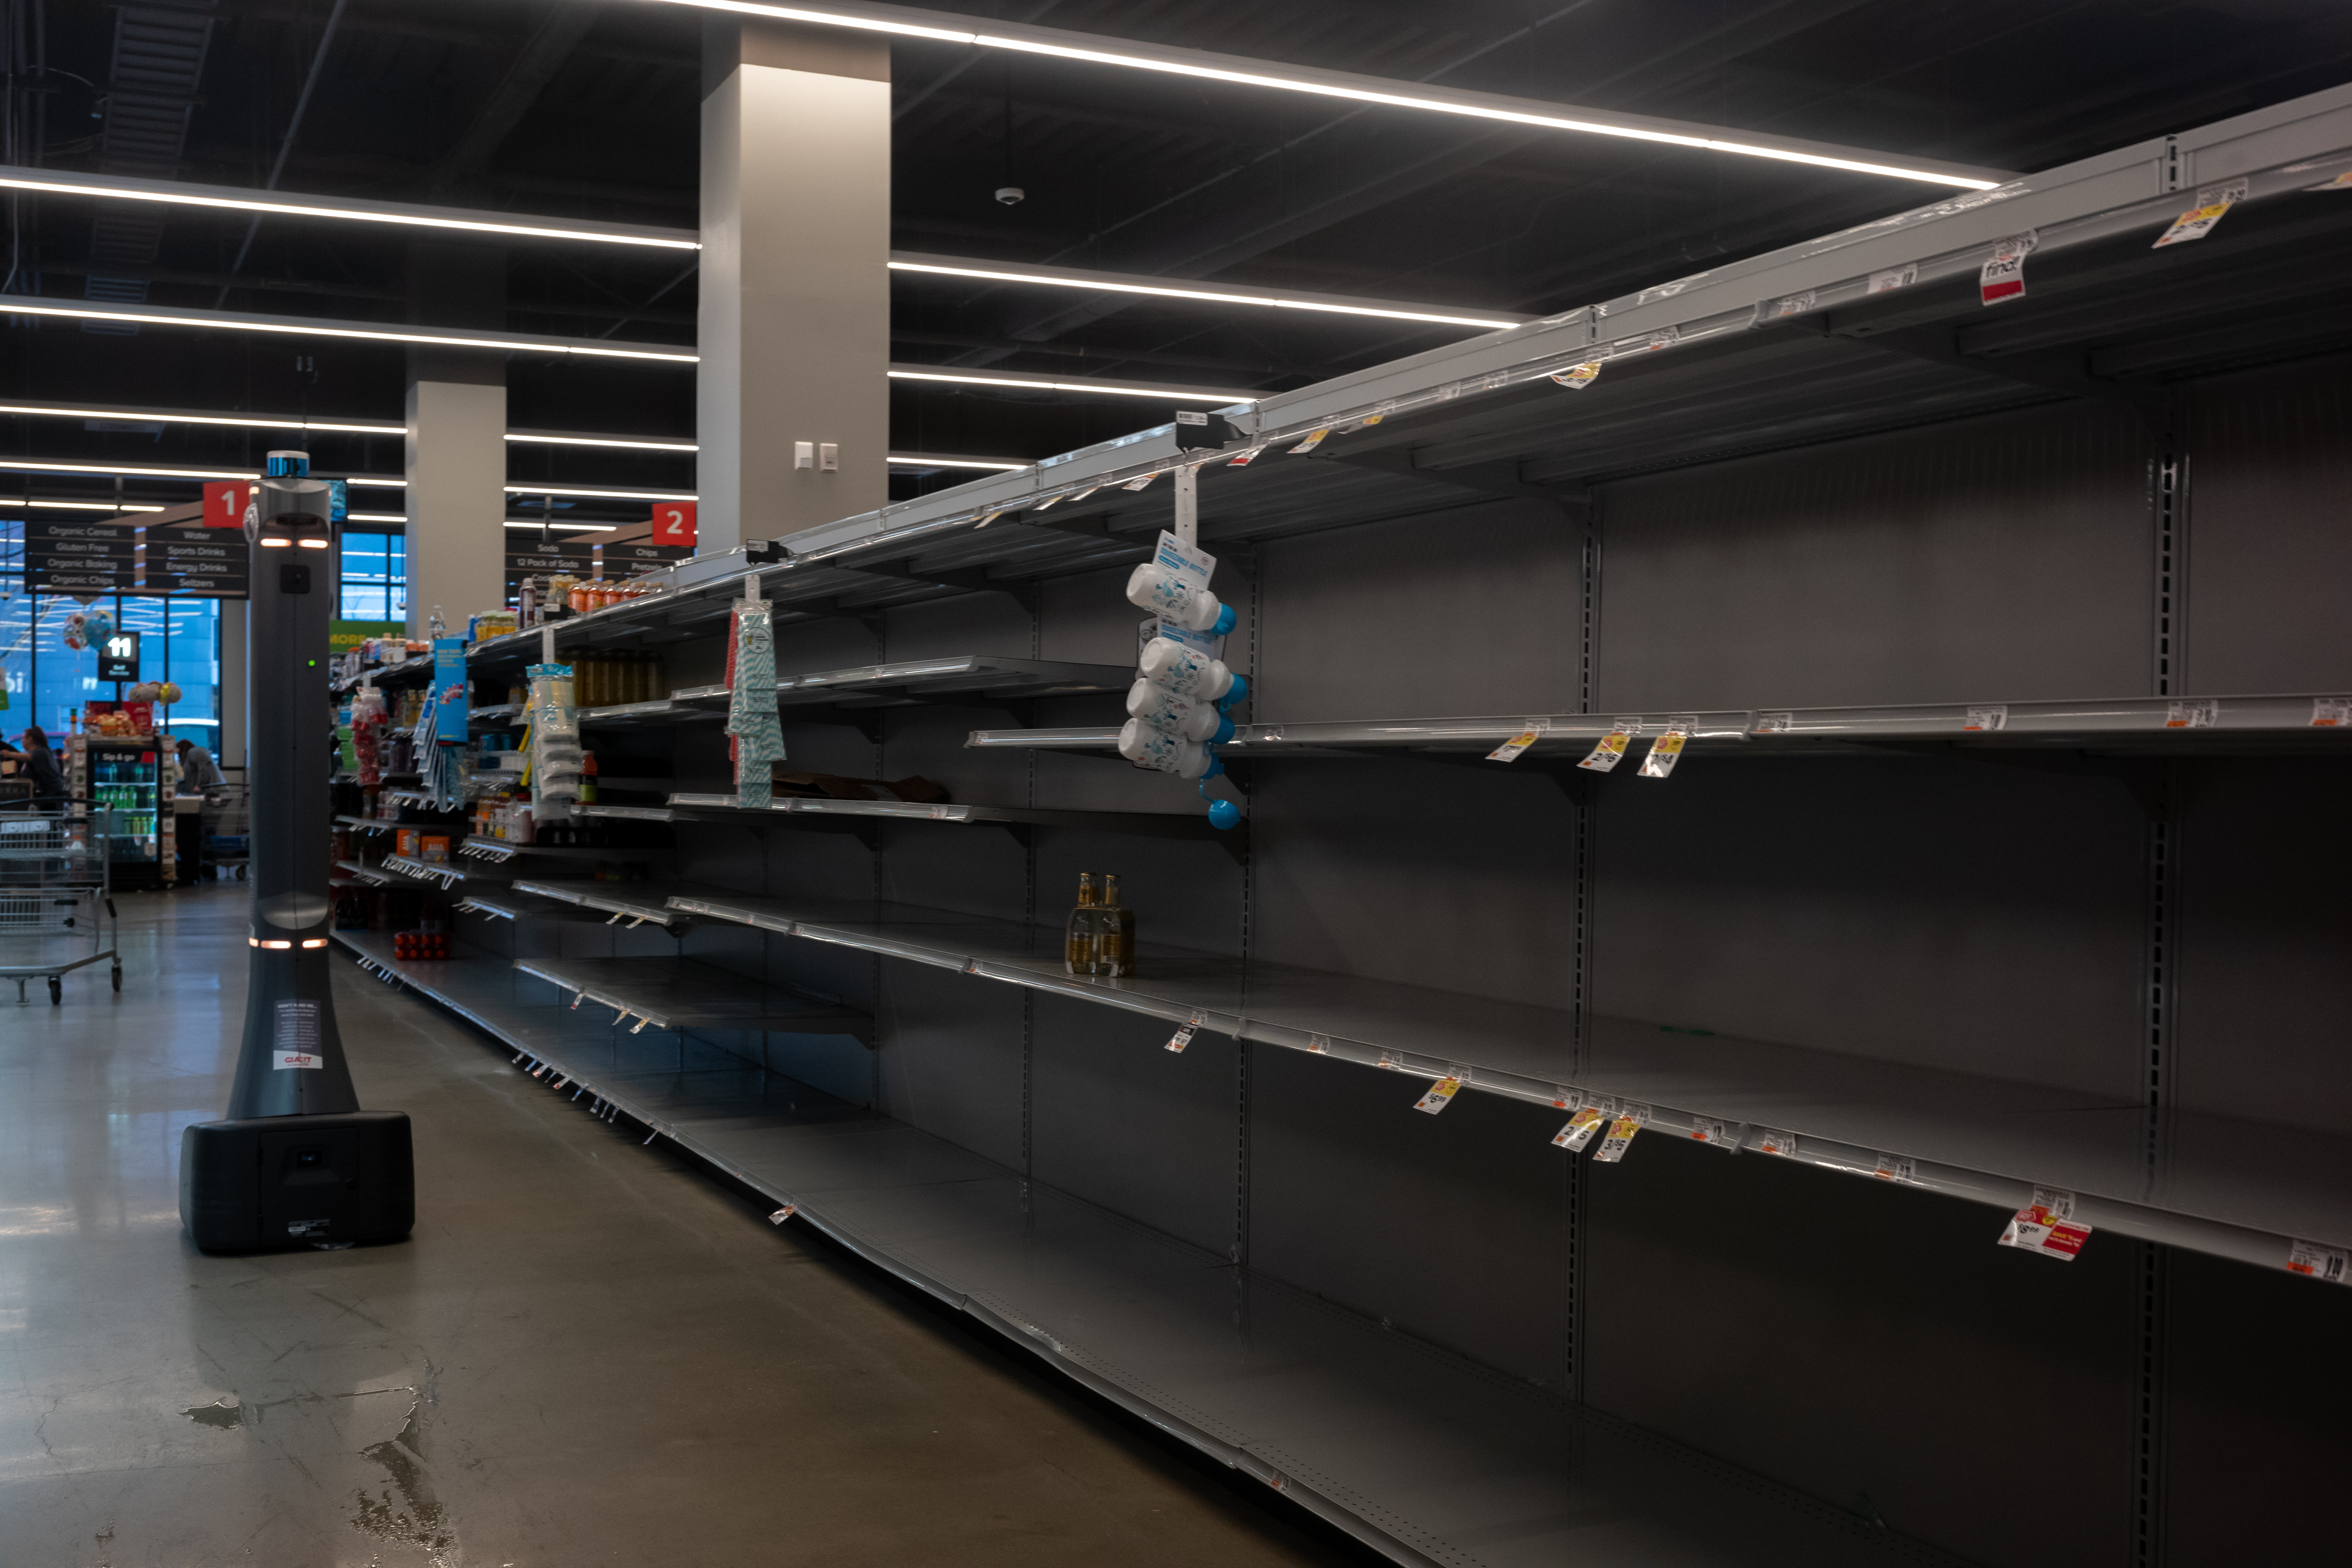 Empty shelves in a grocery aisle.